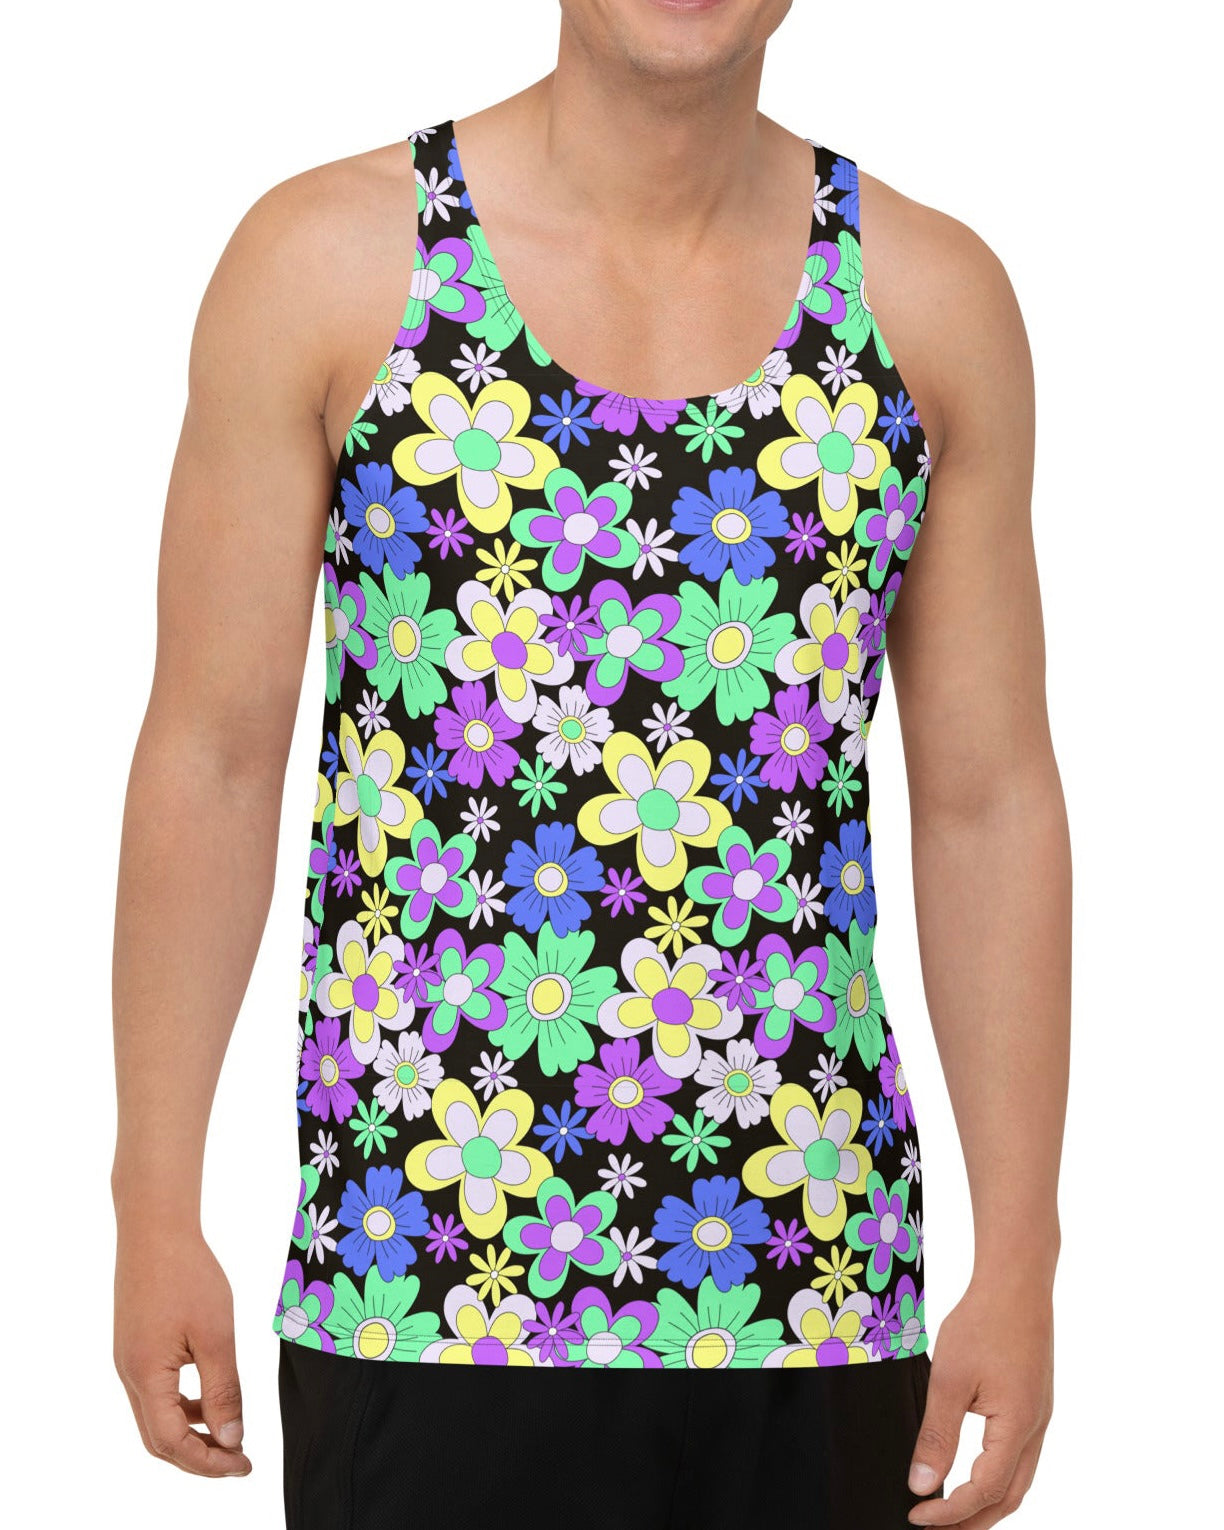 Crazy Daisy Tank Top, Tank Top, - One Stop Rave